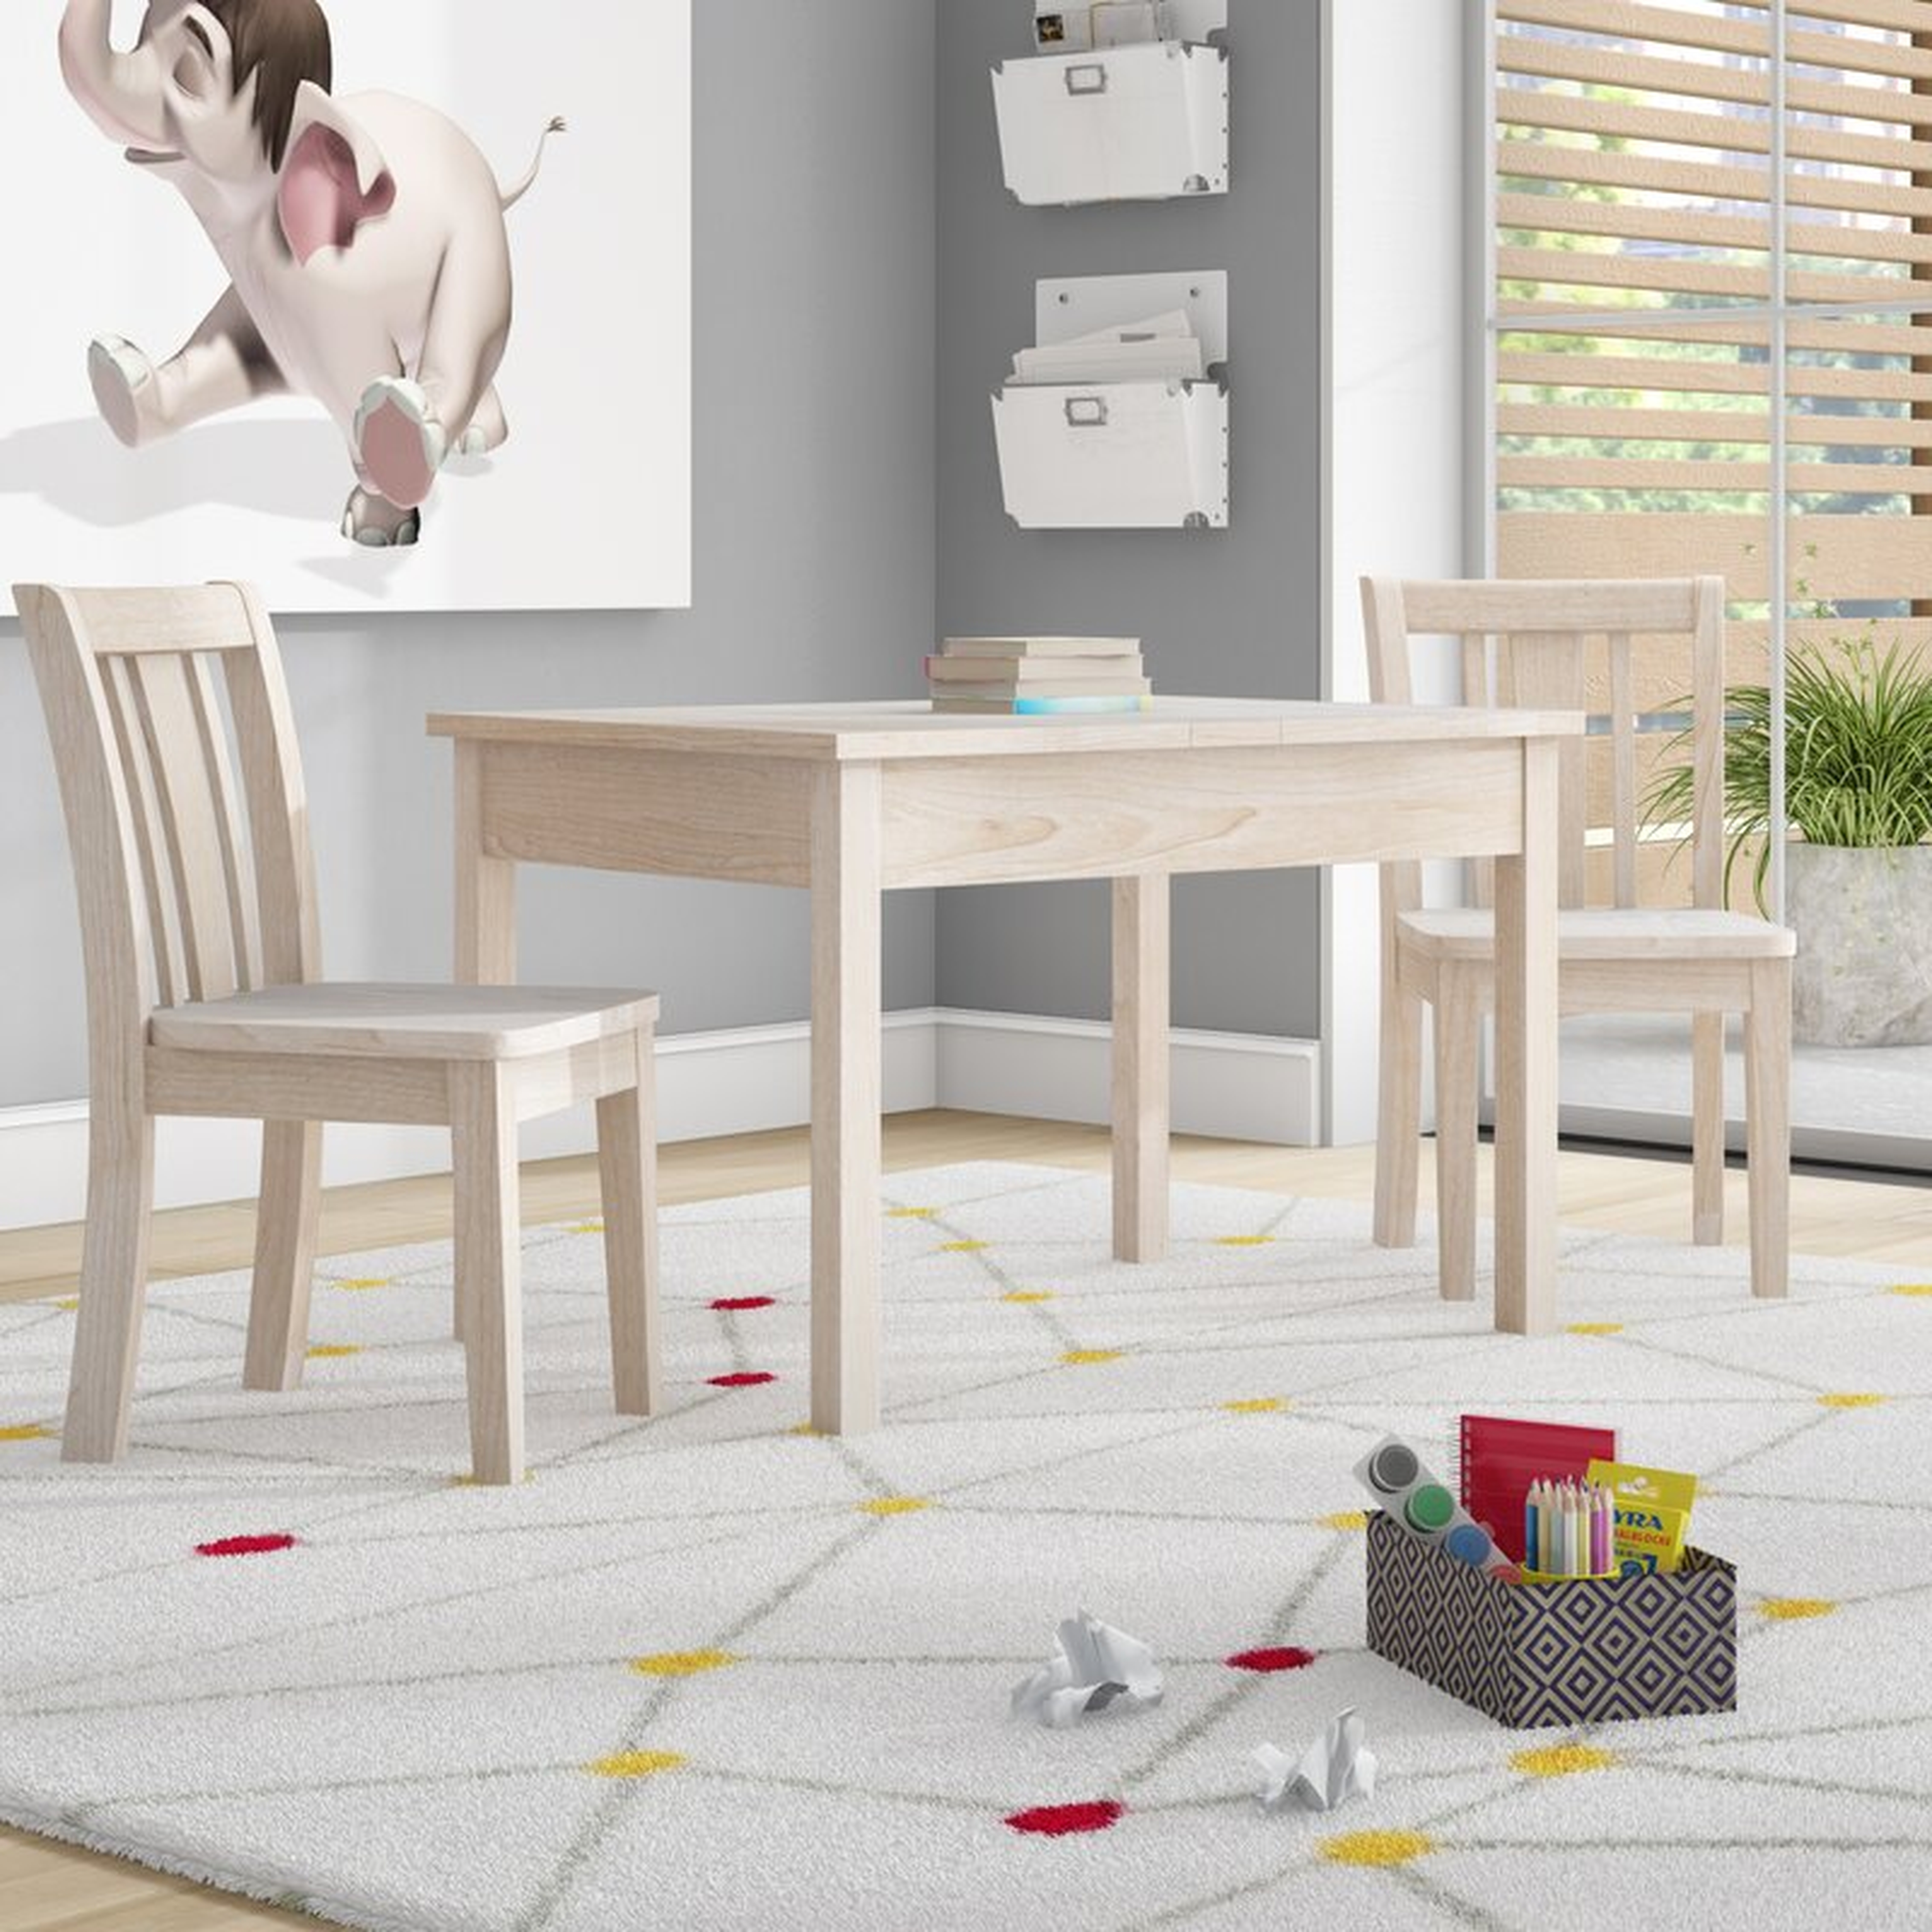 Rozanne Kids 3 Piece Play Table and Chair Set - Wayfair